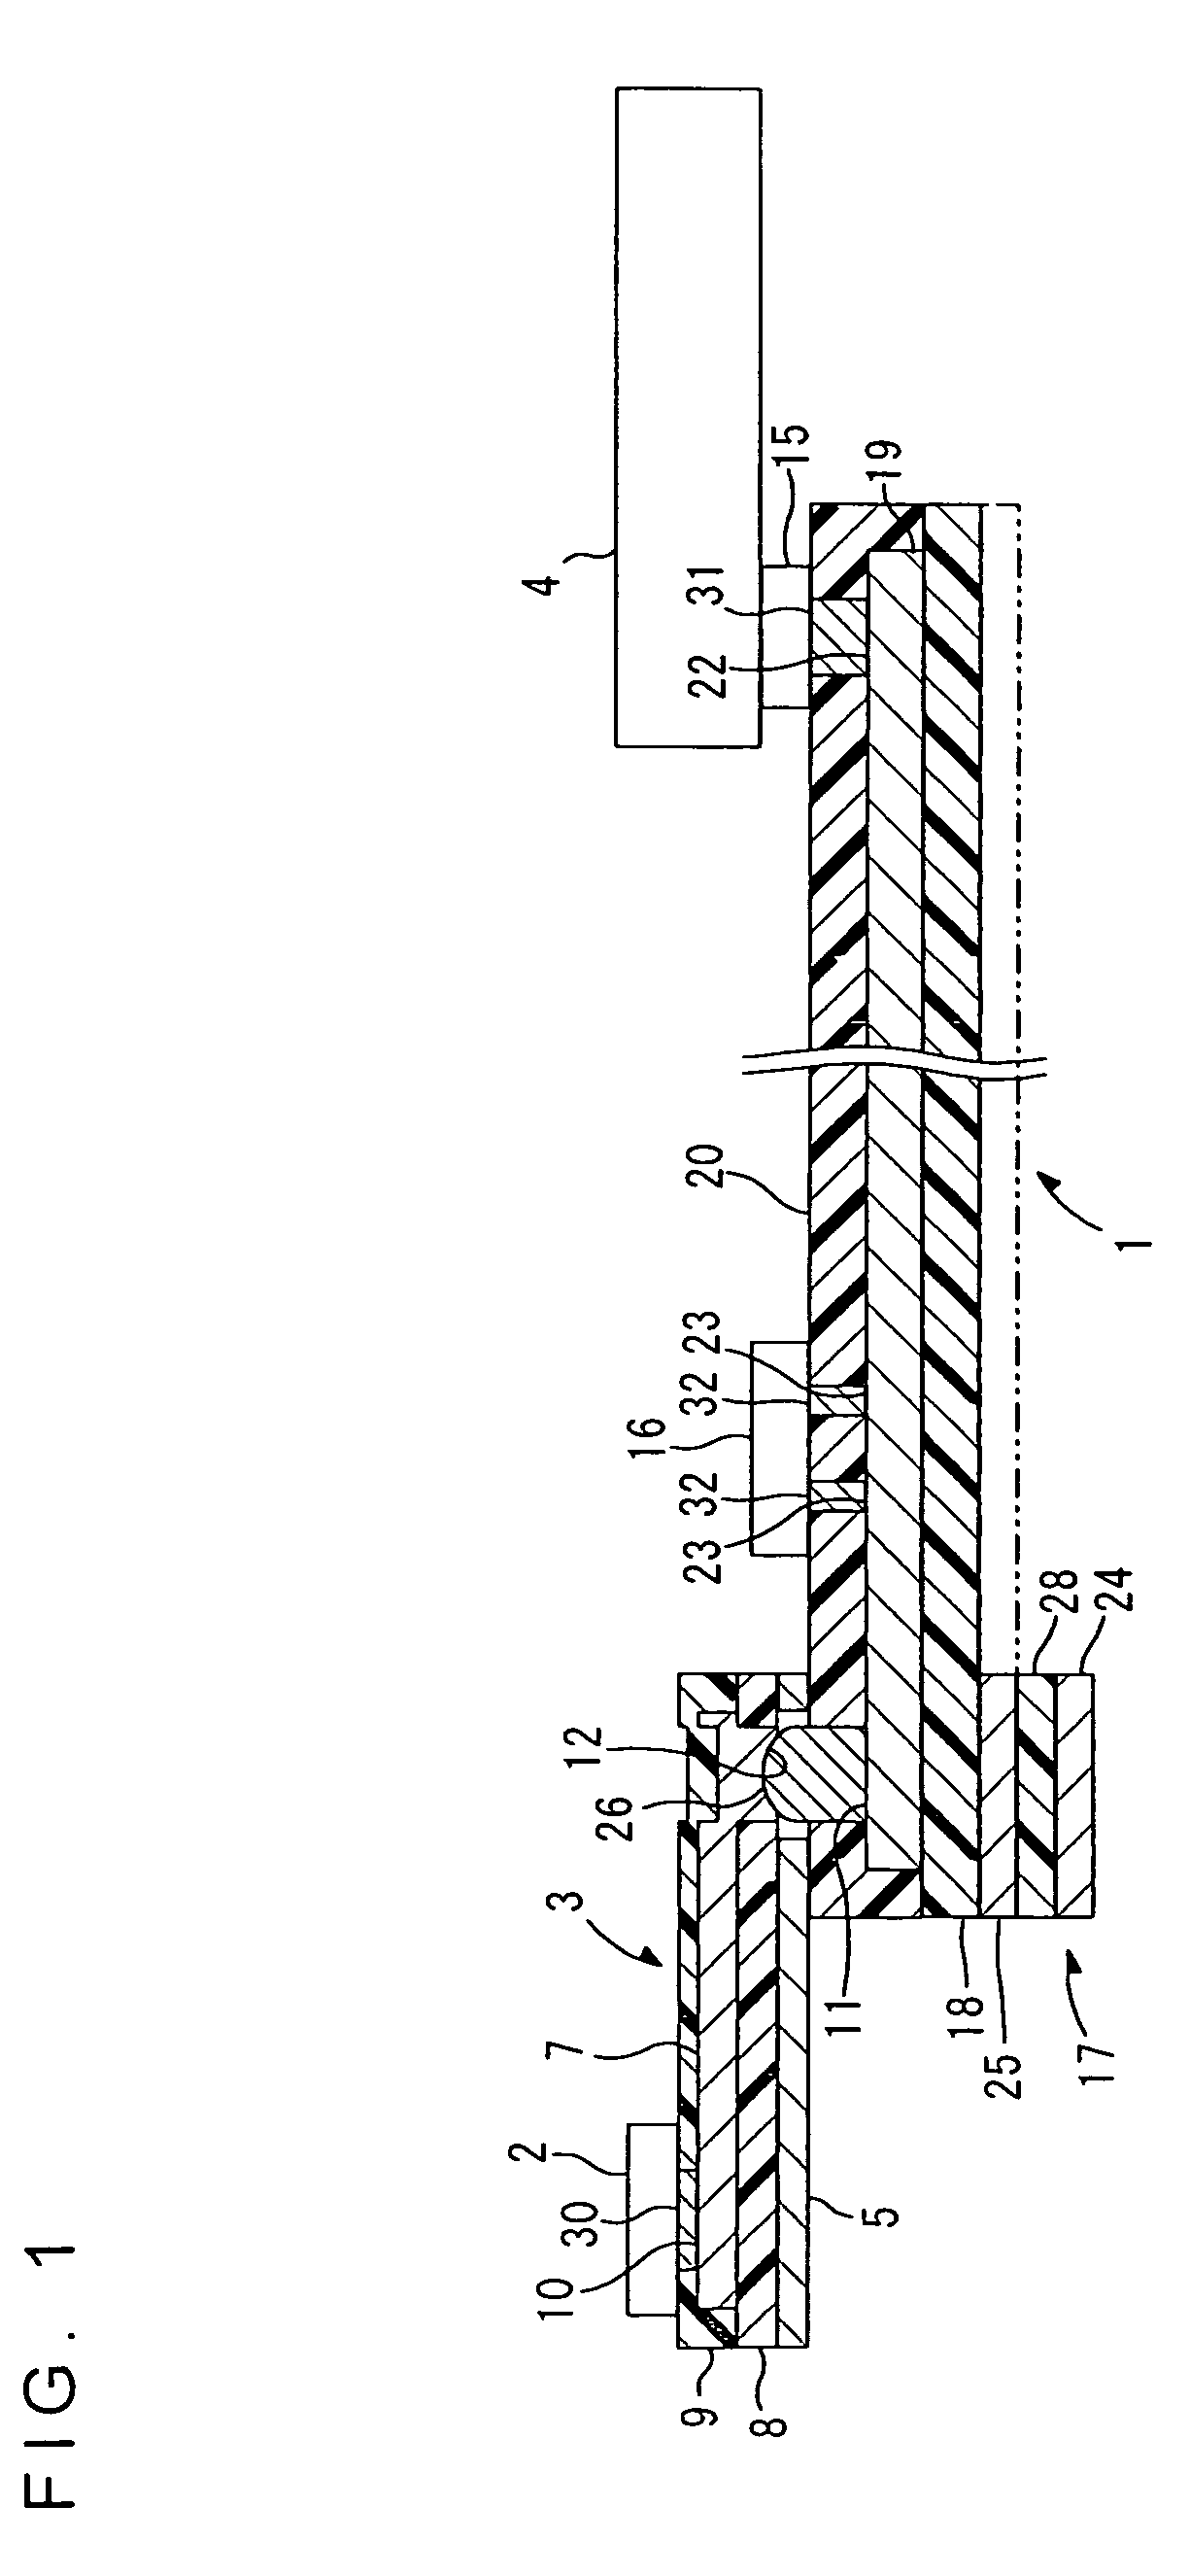 Wired circuit board for controlling characteristic impedances of a connection terminal